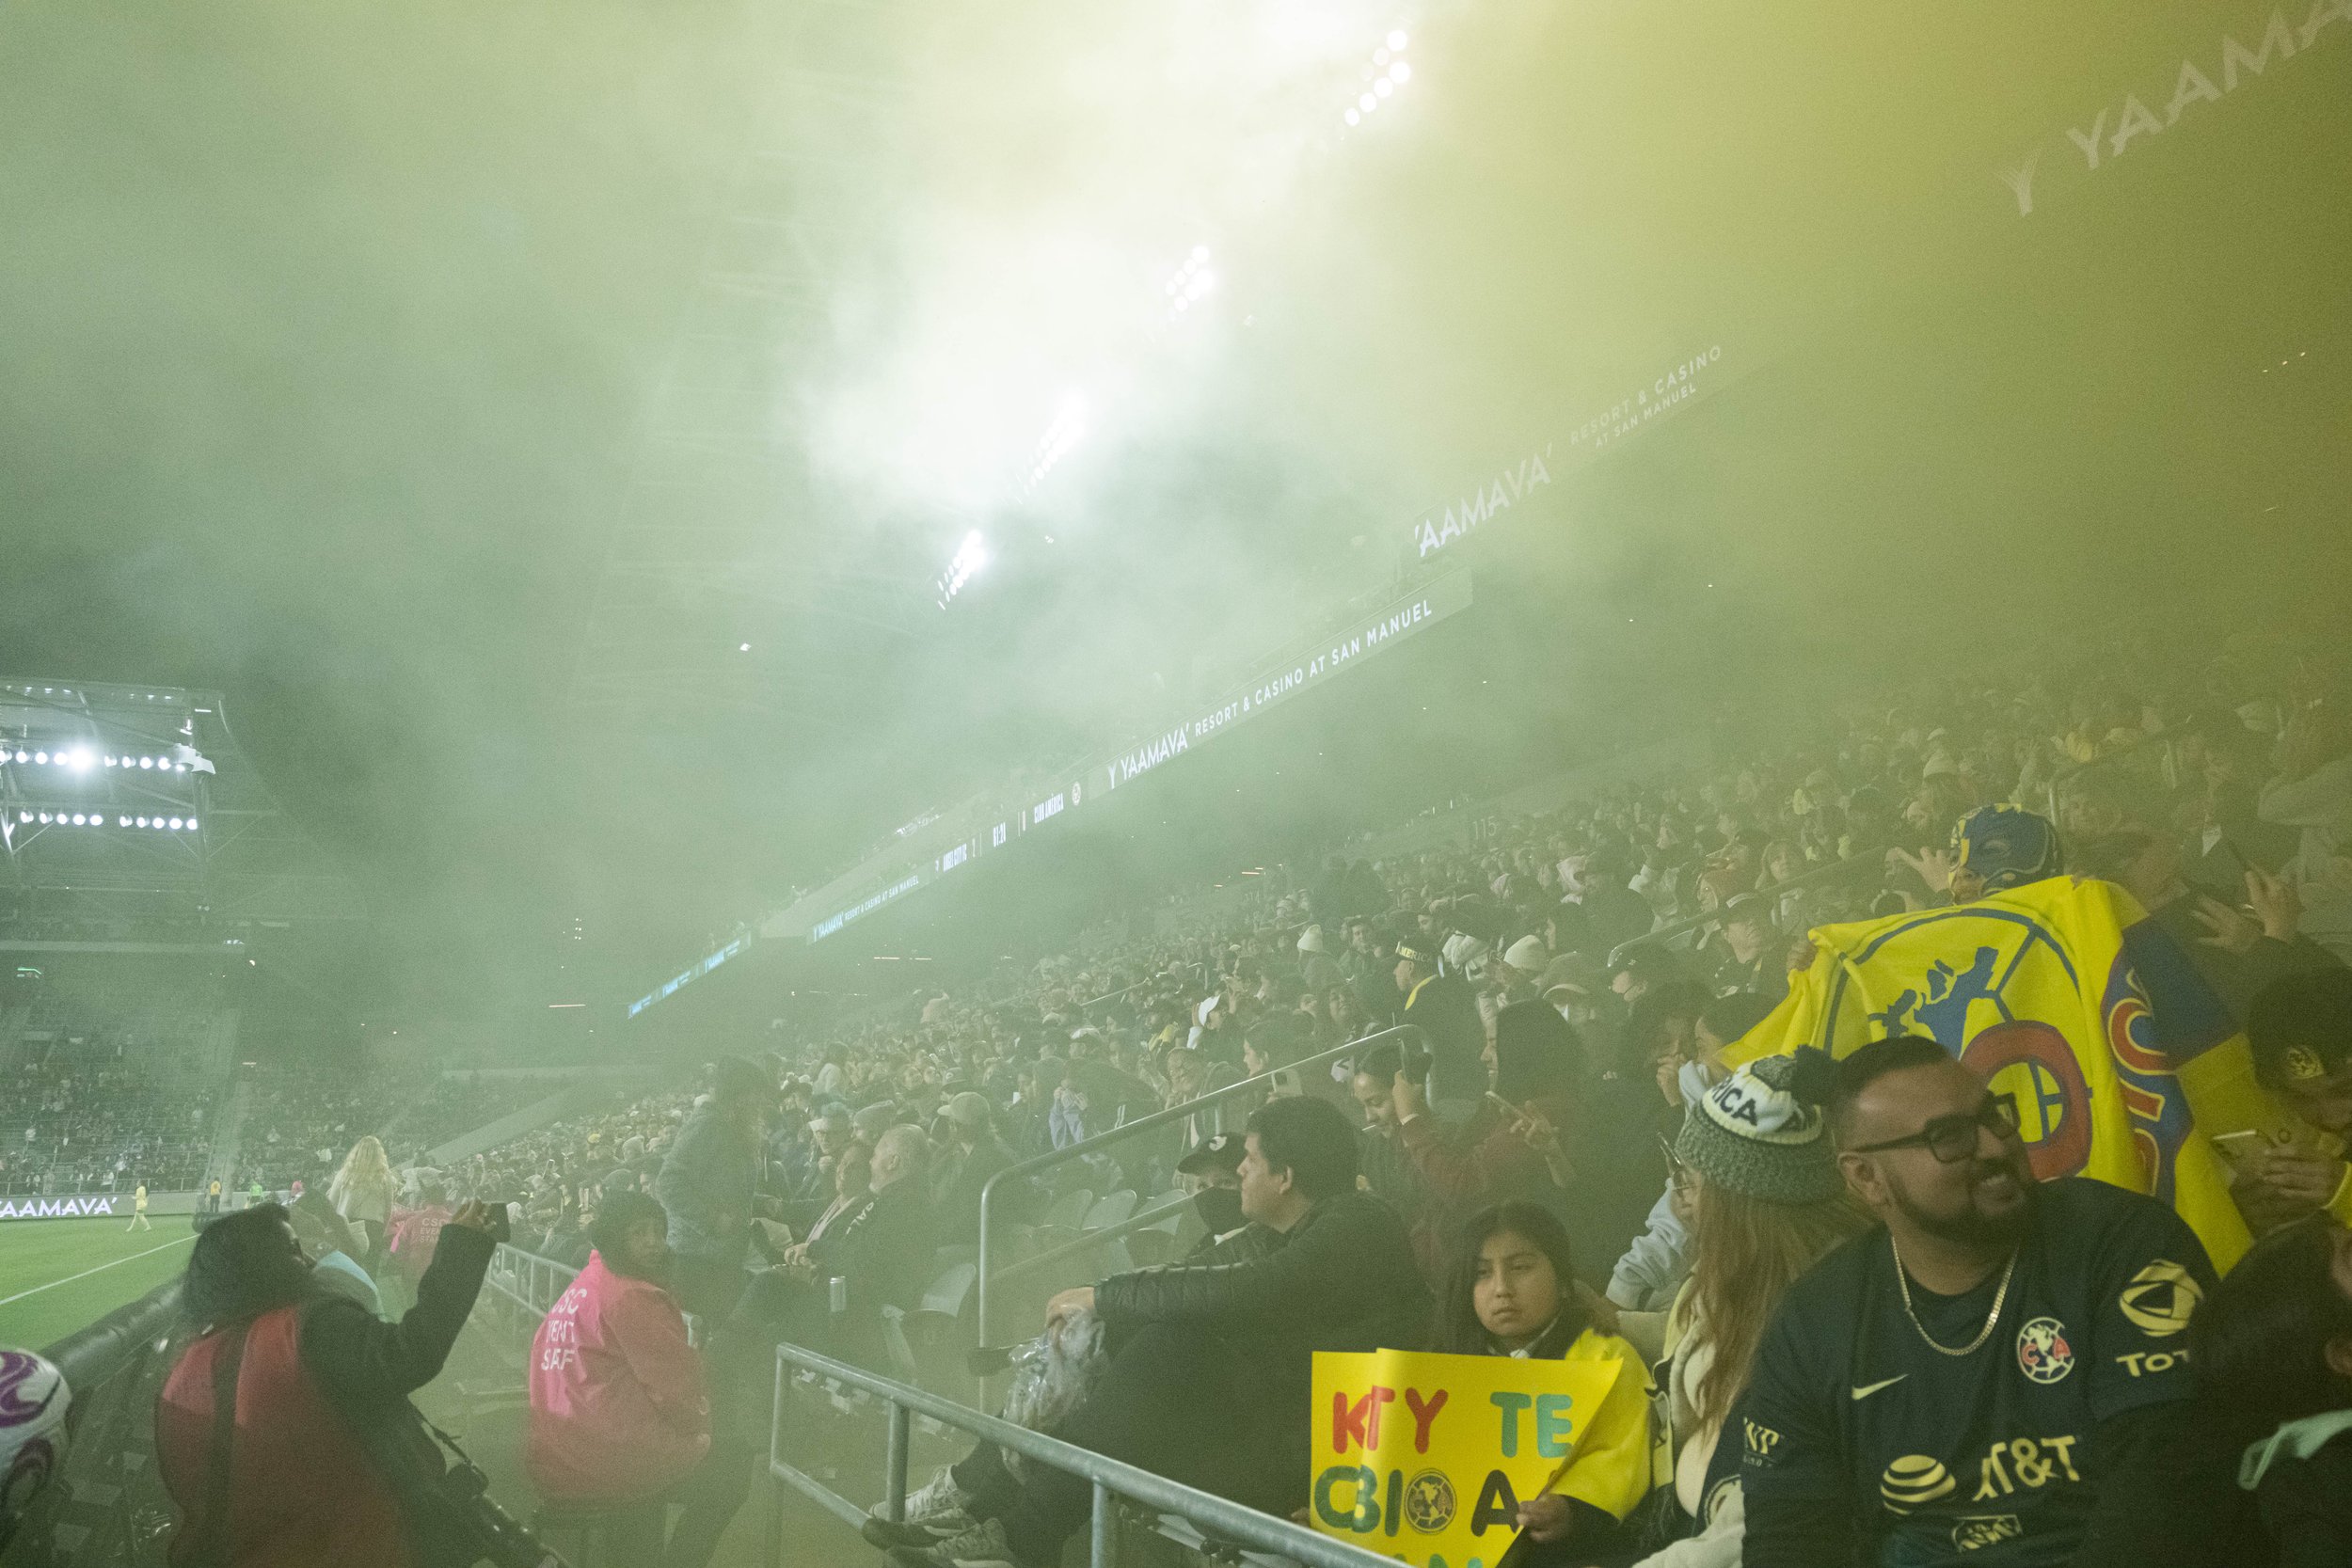  Angel City Football Club and Club America Femenil fans inside a cloud of yellow smoke released by fans from the second floor seats followed by a small parade of spark like fireworks on Wed. March 8 , 2023 at BMO Stadium in Los Angeles, Calif. (Danil